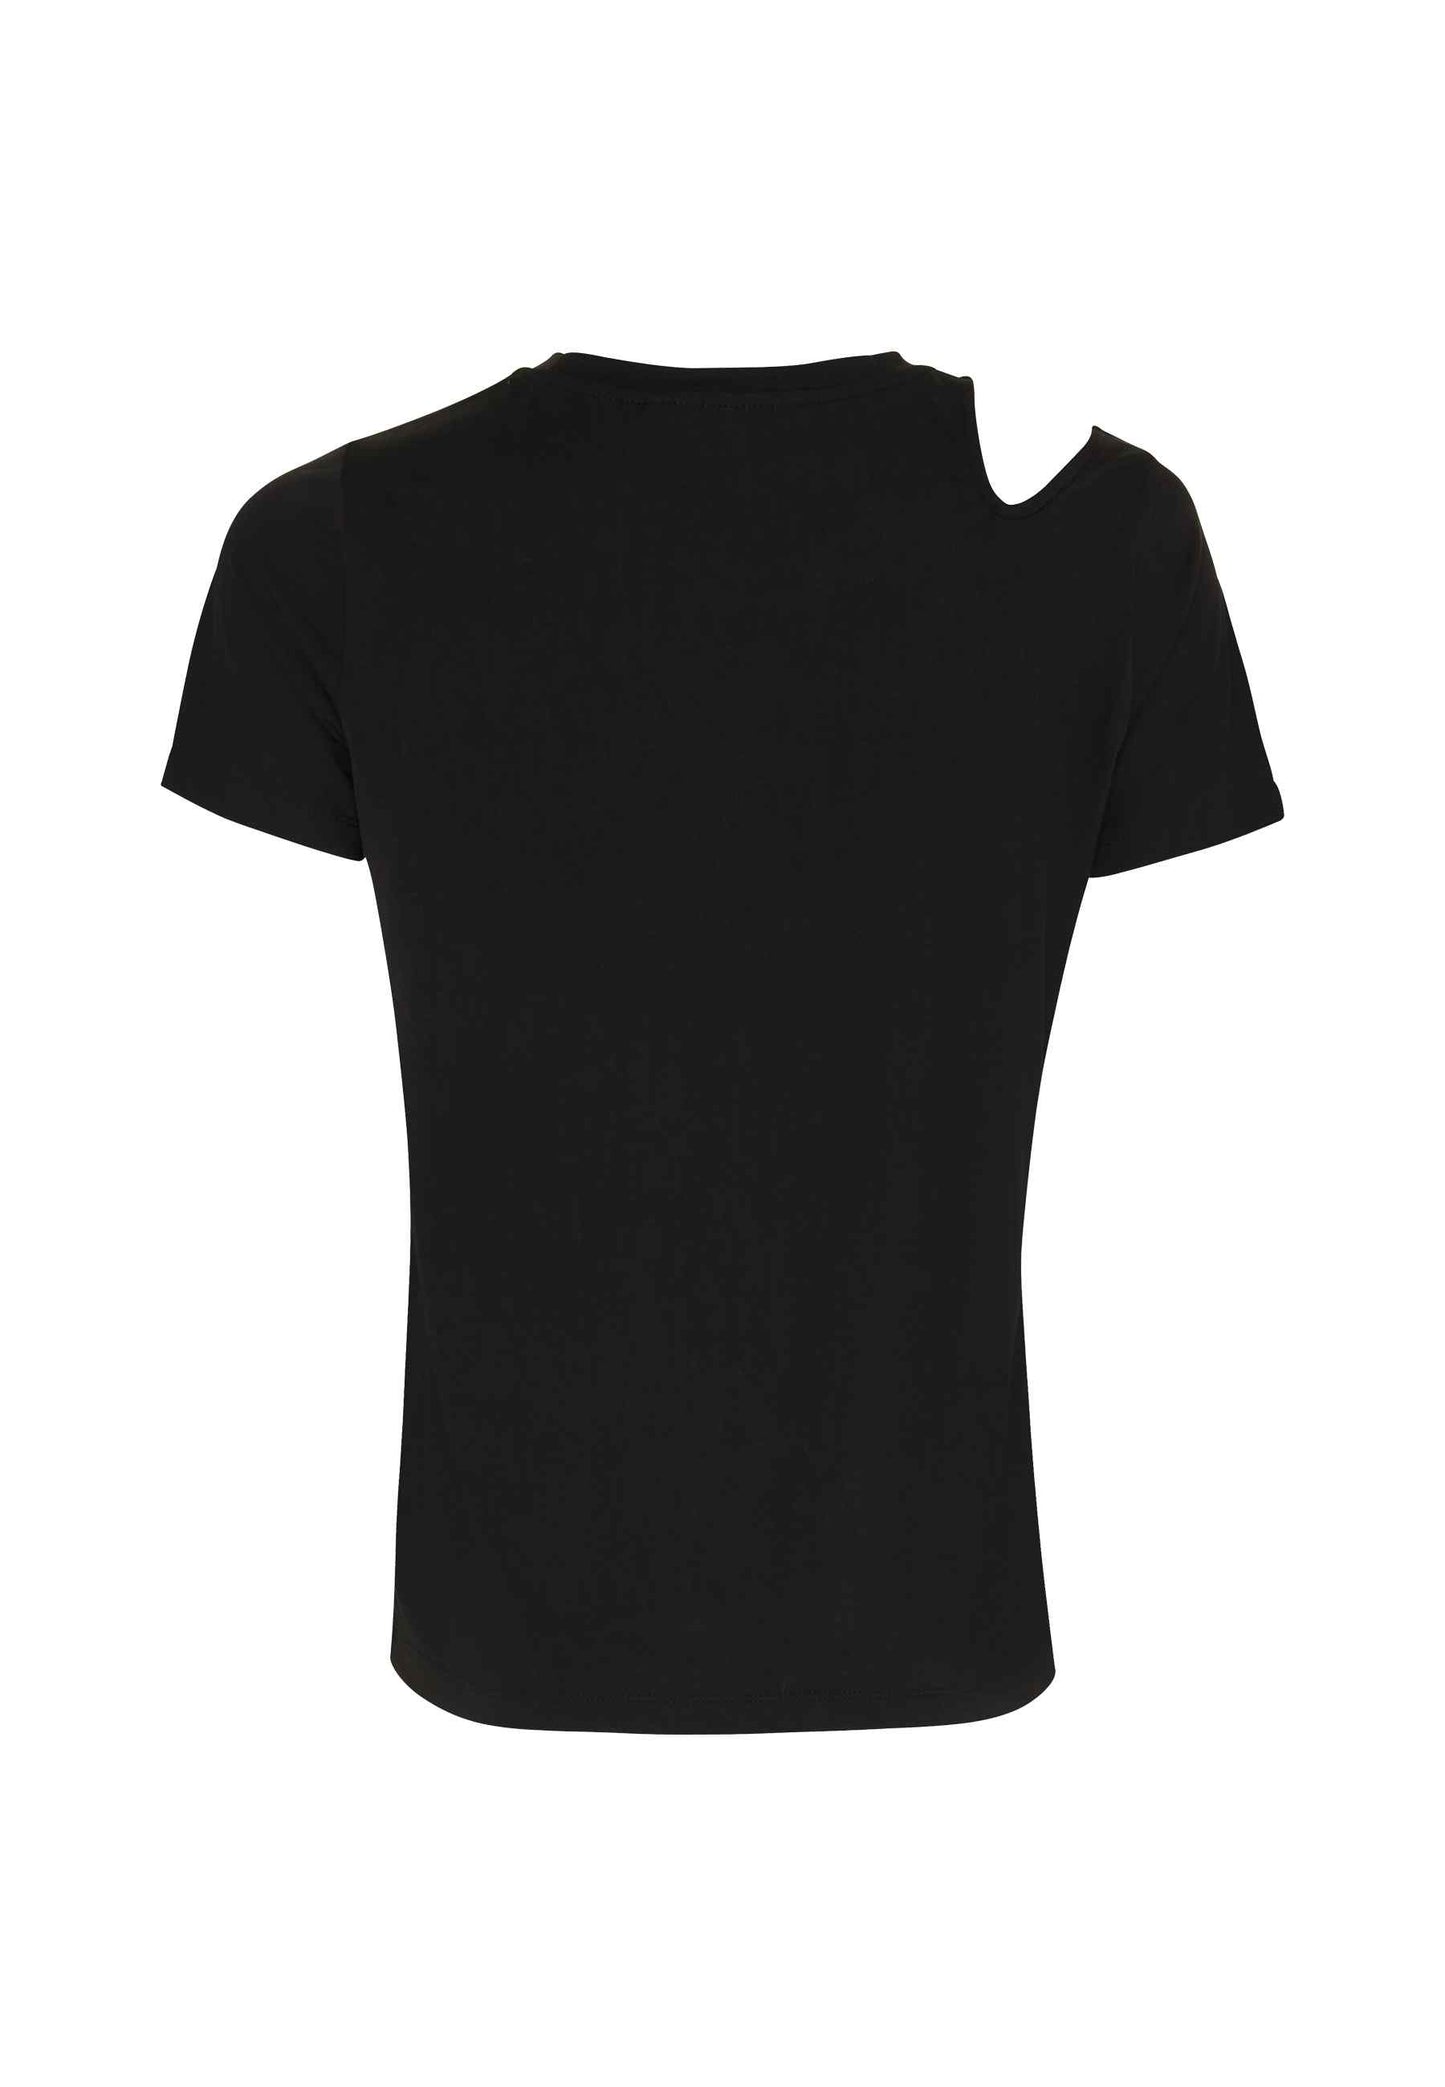 T-shirt with cut and round neck